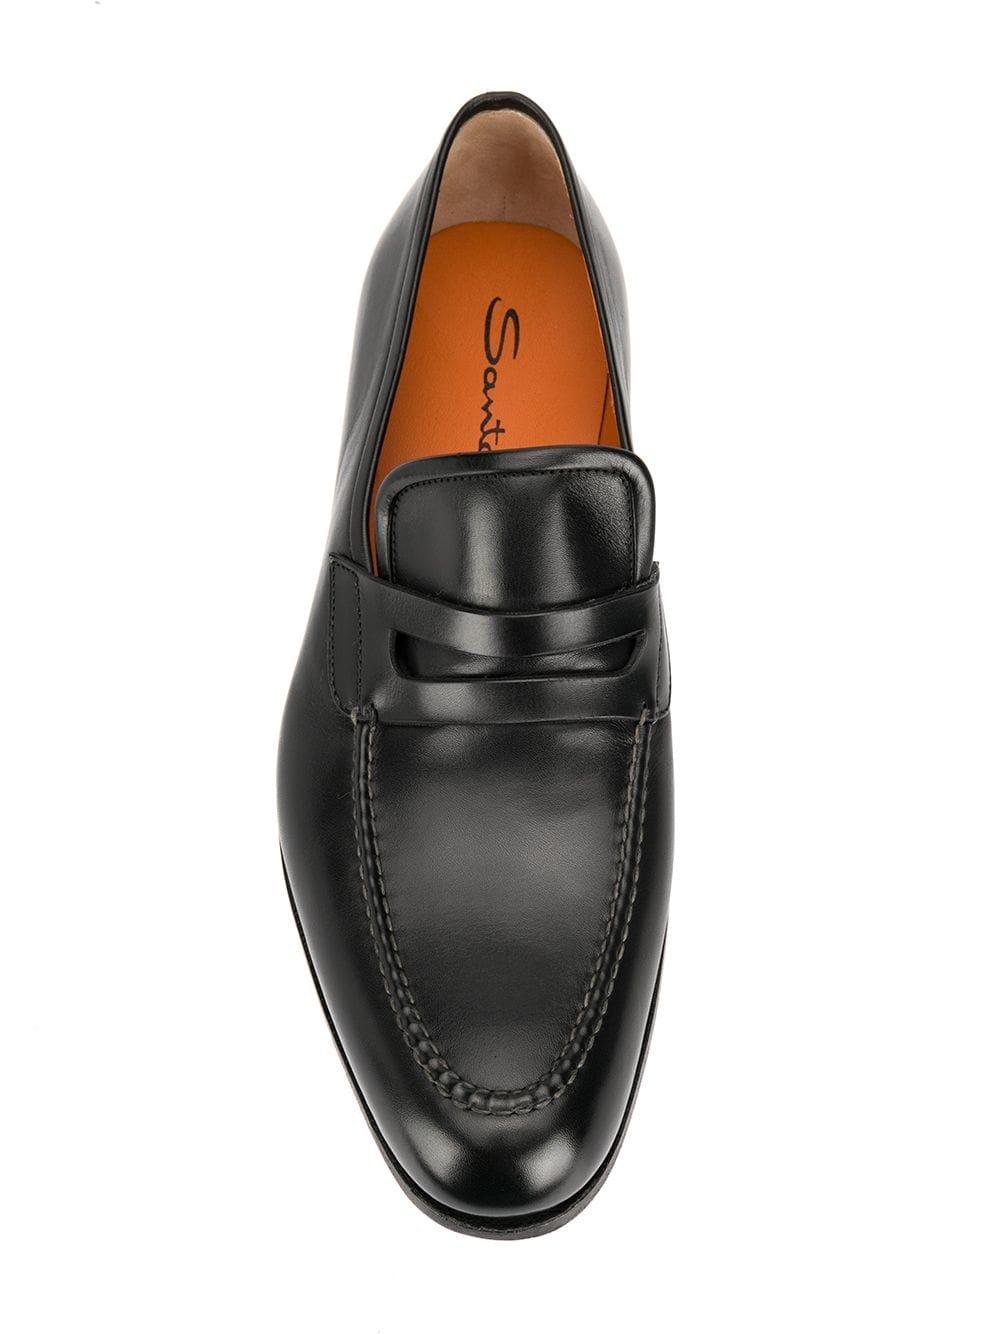 Santoni Leather Penny Loafers in Black for Men - Lyst